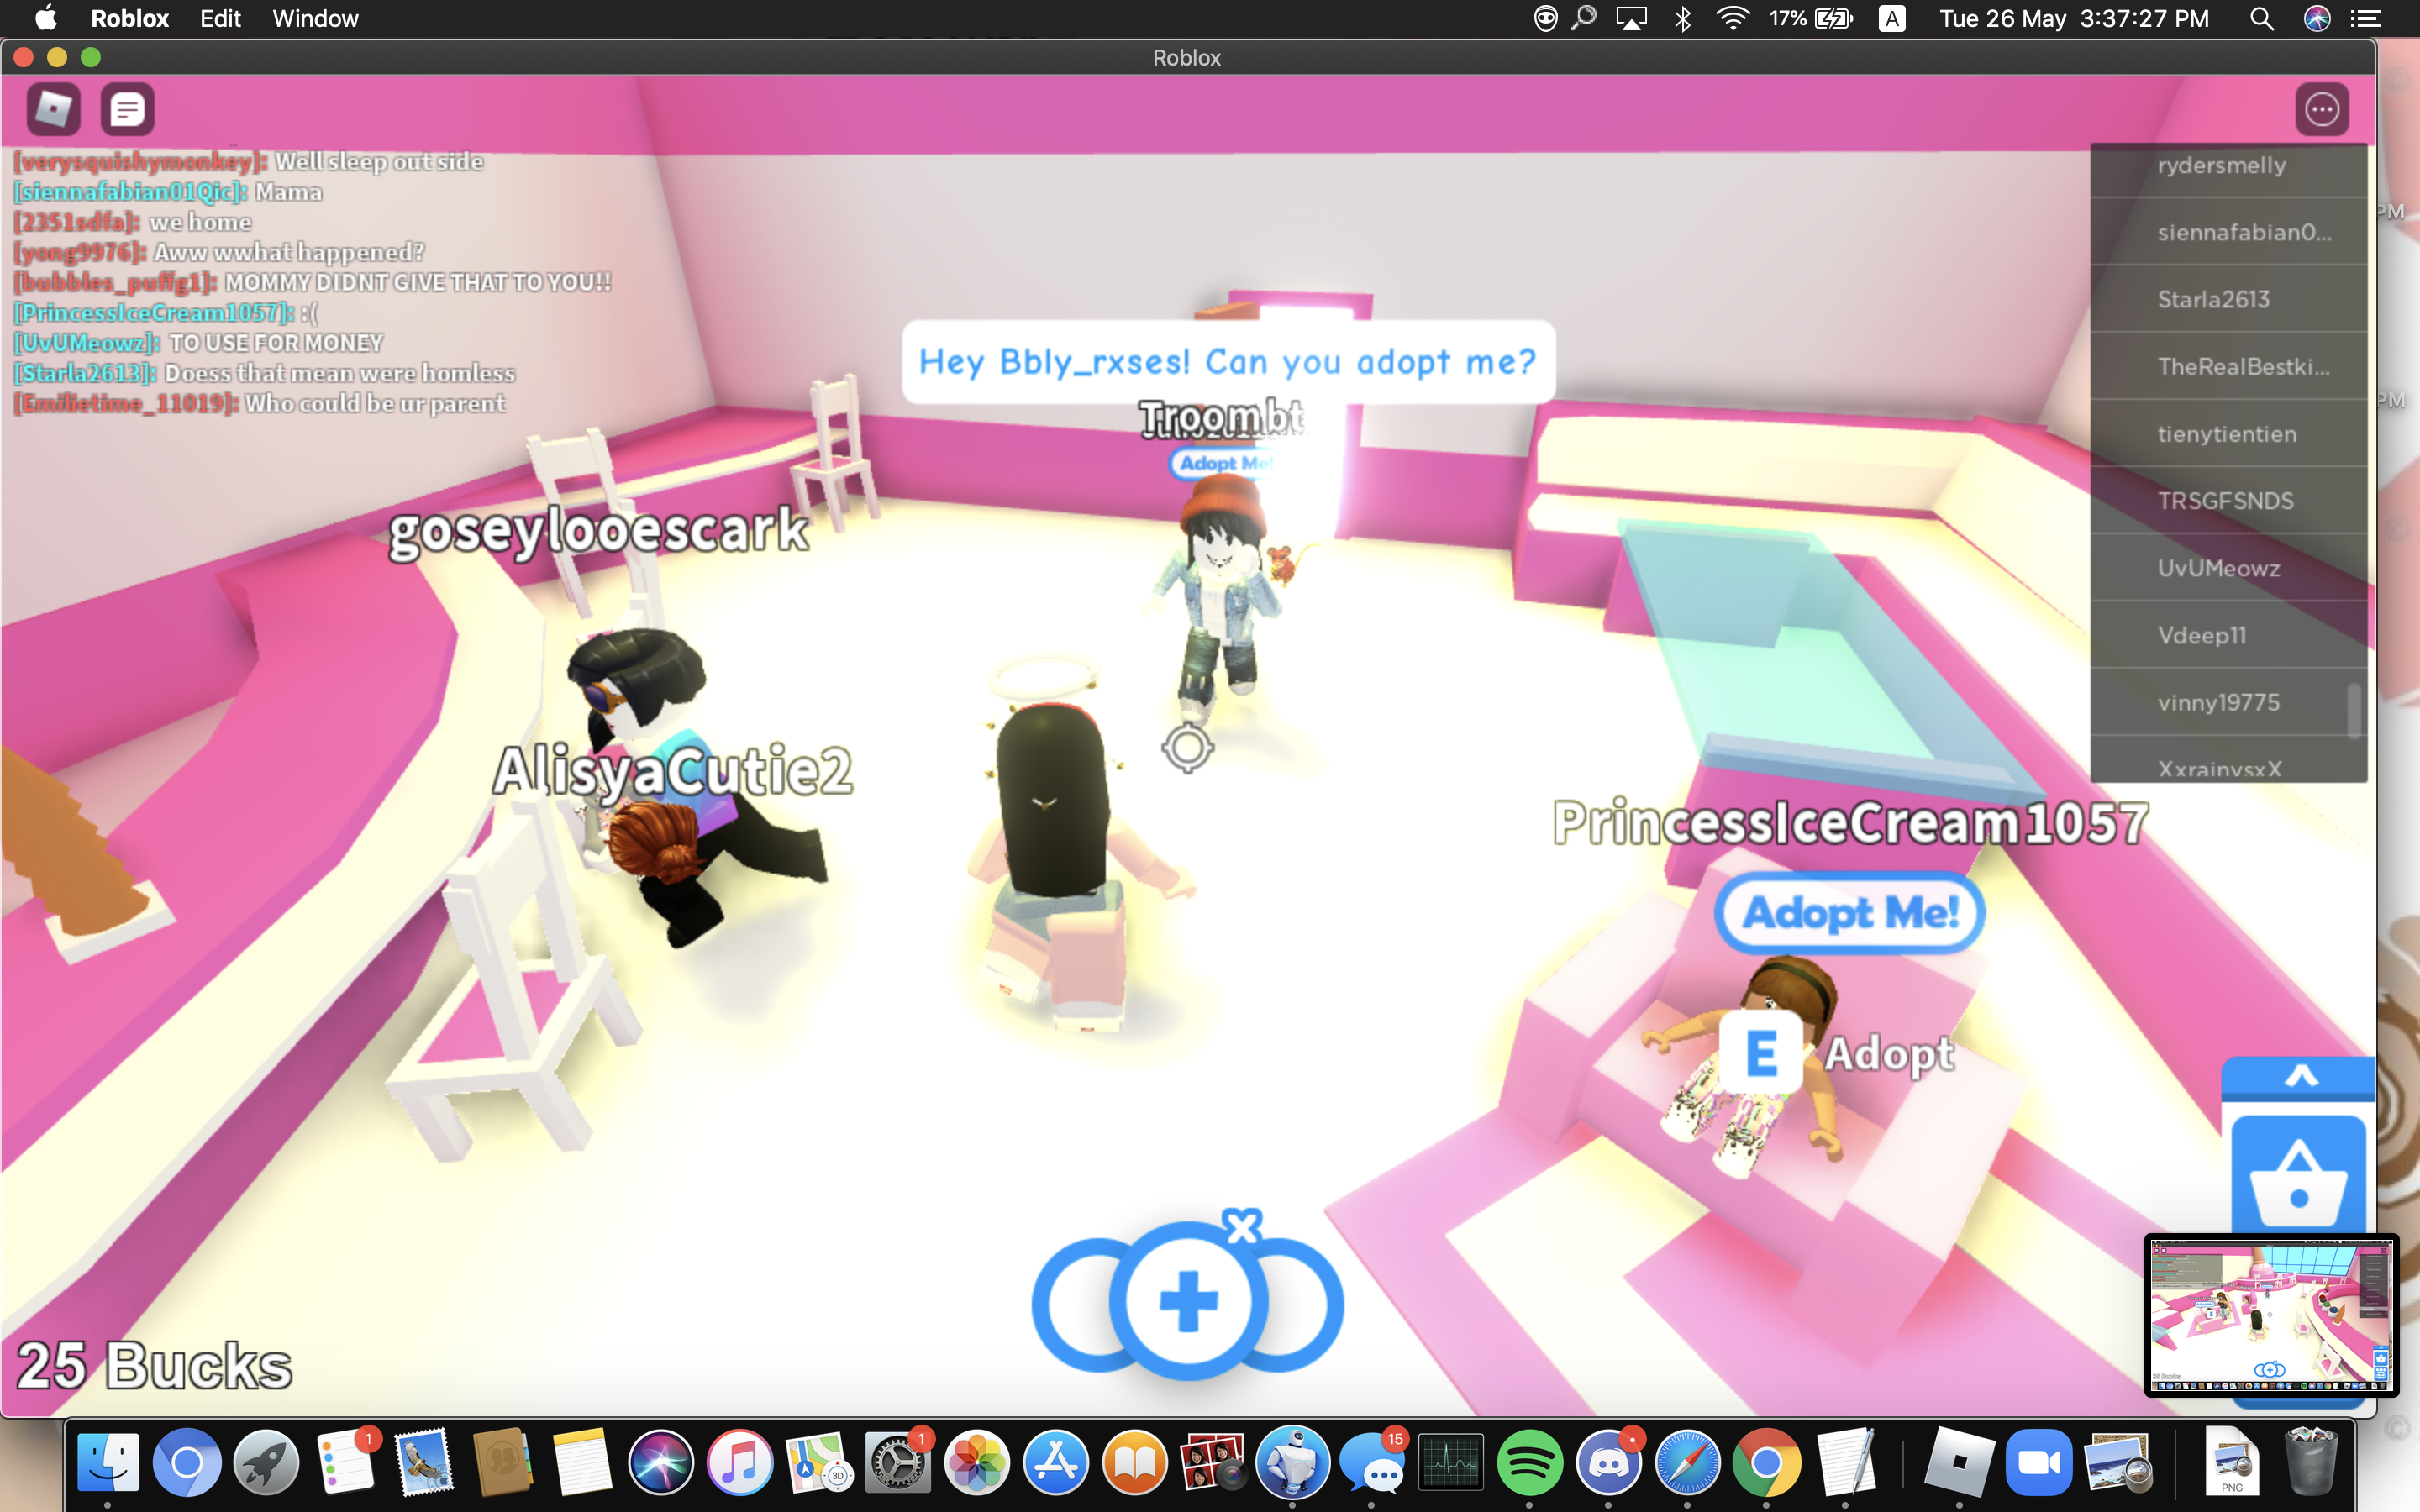 Went And Played Adopt Me Legacy D Link Below Fandom - e https roblox.comgames